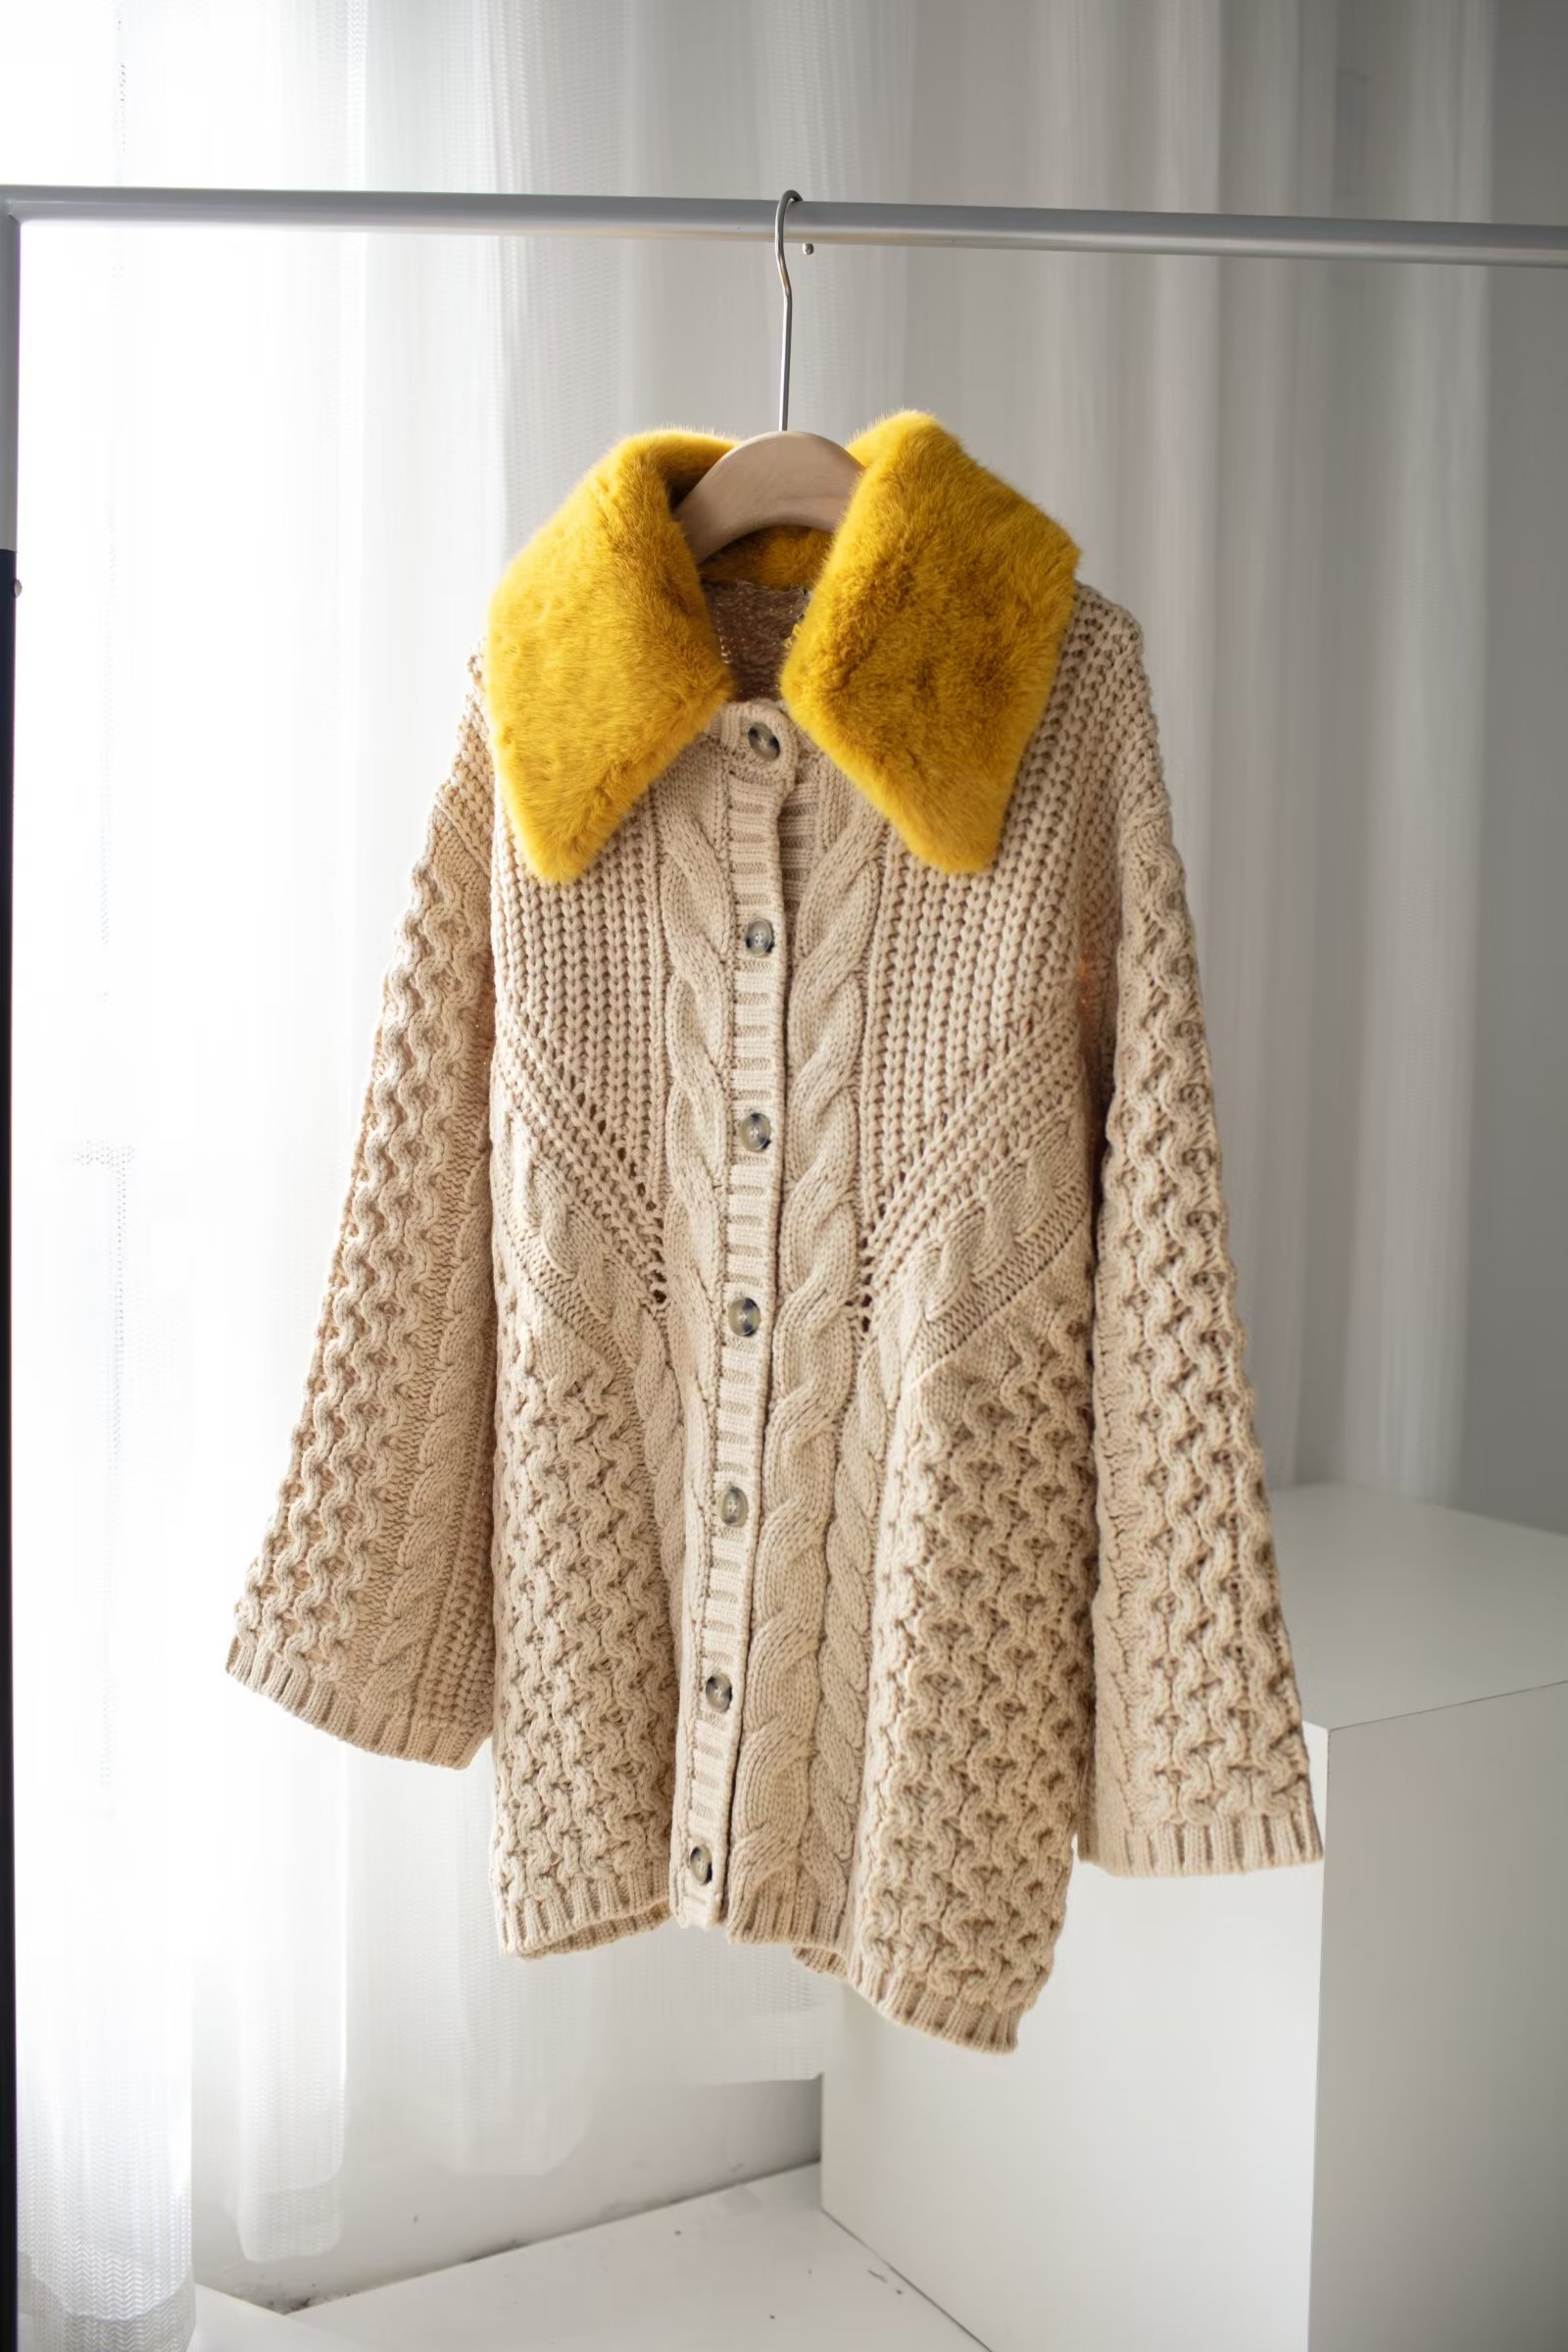 Knitted Sweater Cardigan - Sweaters - Uniqistic.com